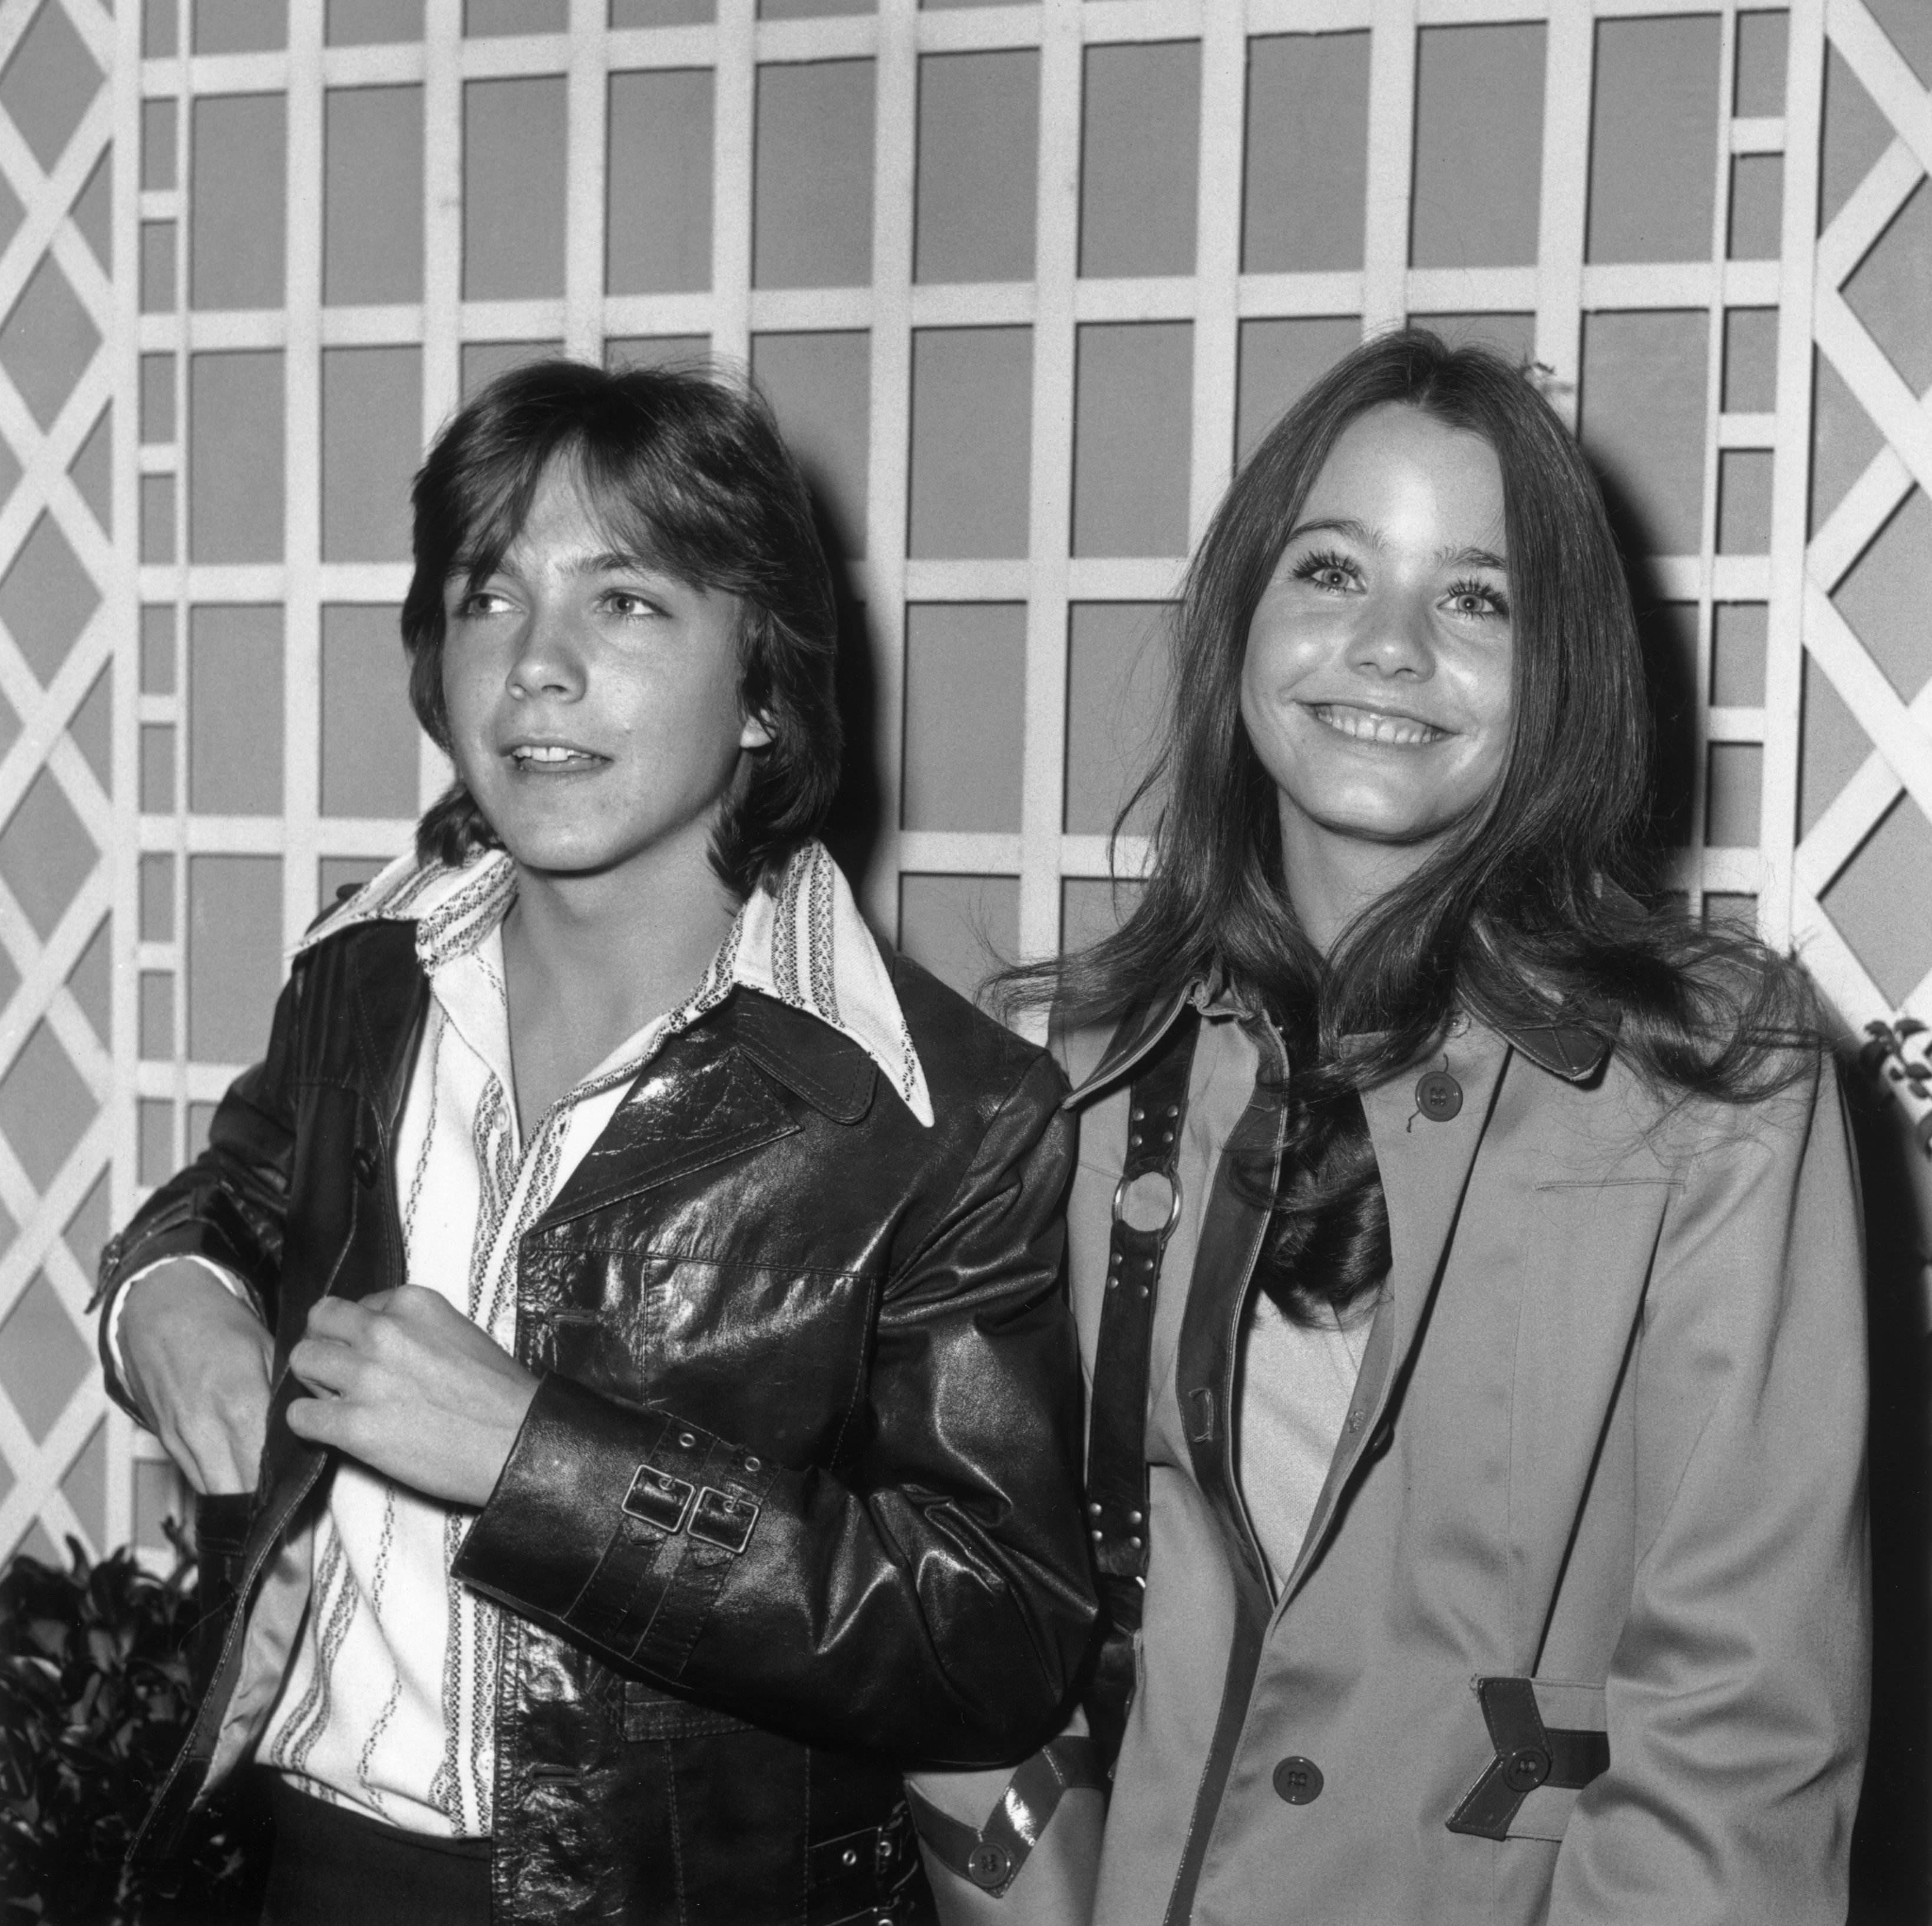 American actors David Cassidy and Susan Dey, costars of the television series 'The Partridge Family,' standing together and smiling while at an ABC party held at the Bistro. | Source: Getty Images